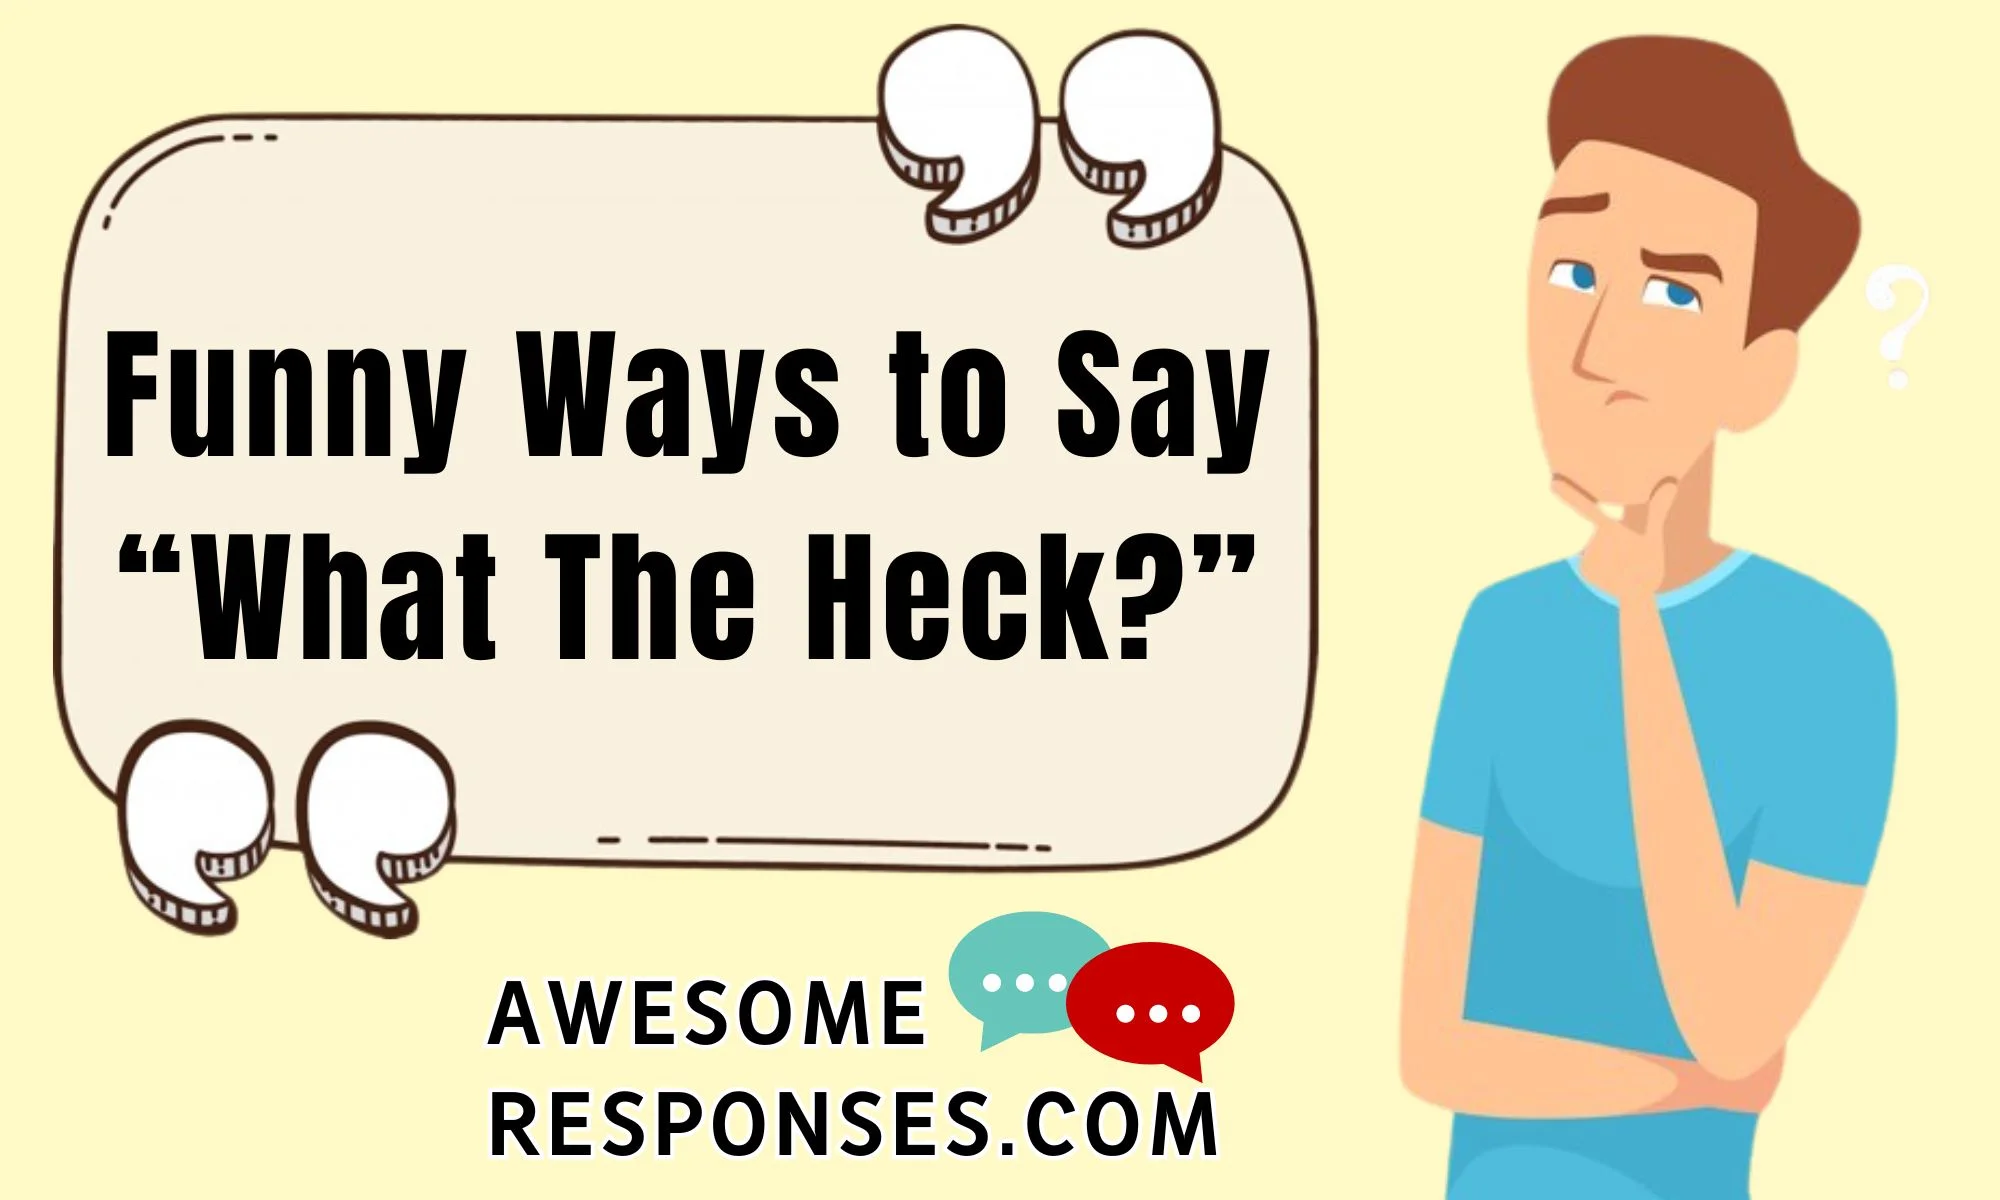 Funny Ways to Say “What The Heck?”